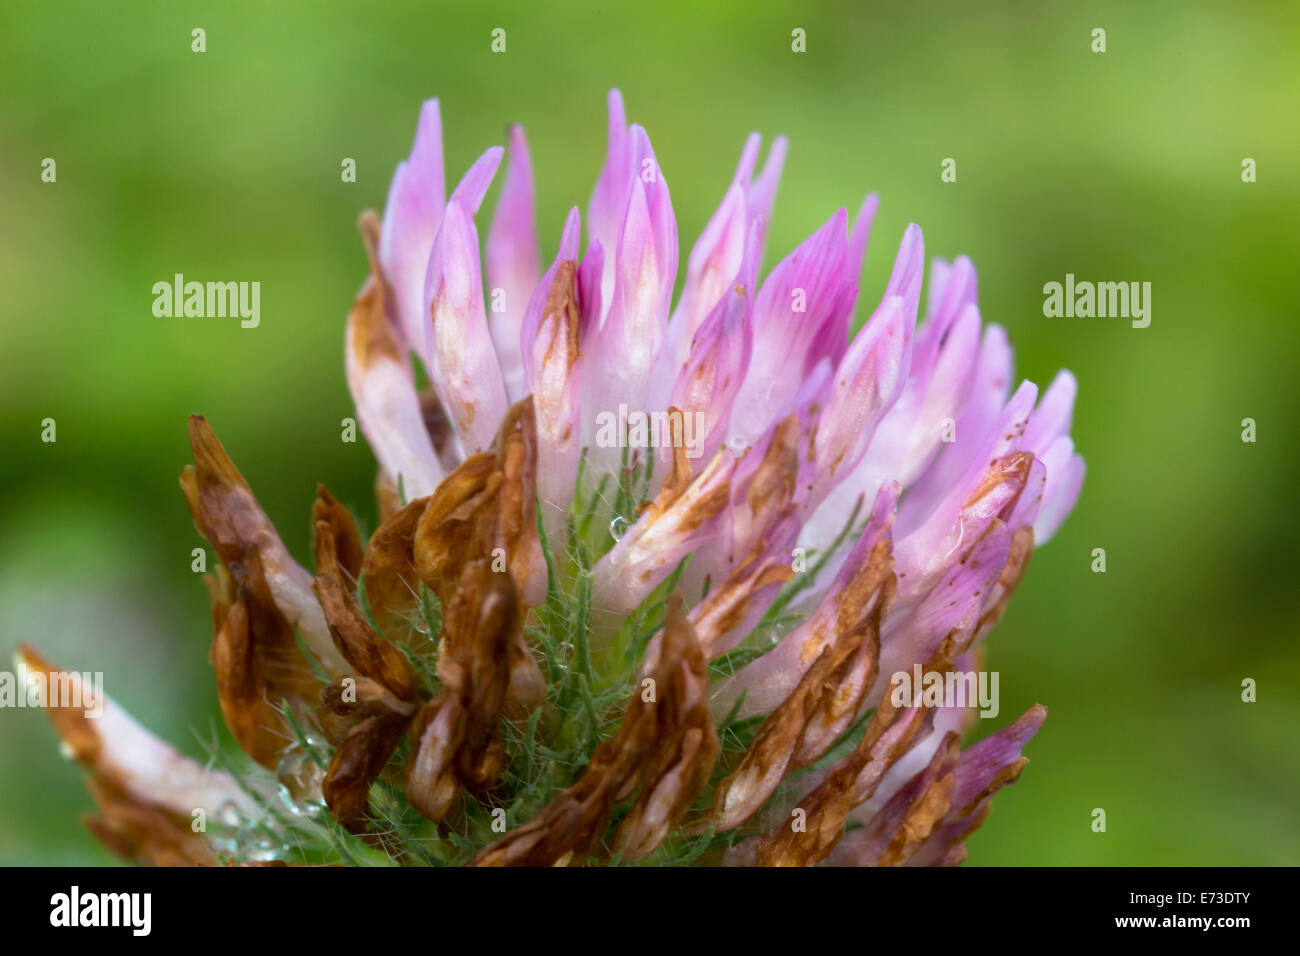 withered clover, Trifolium sp. Stock Photo